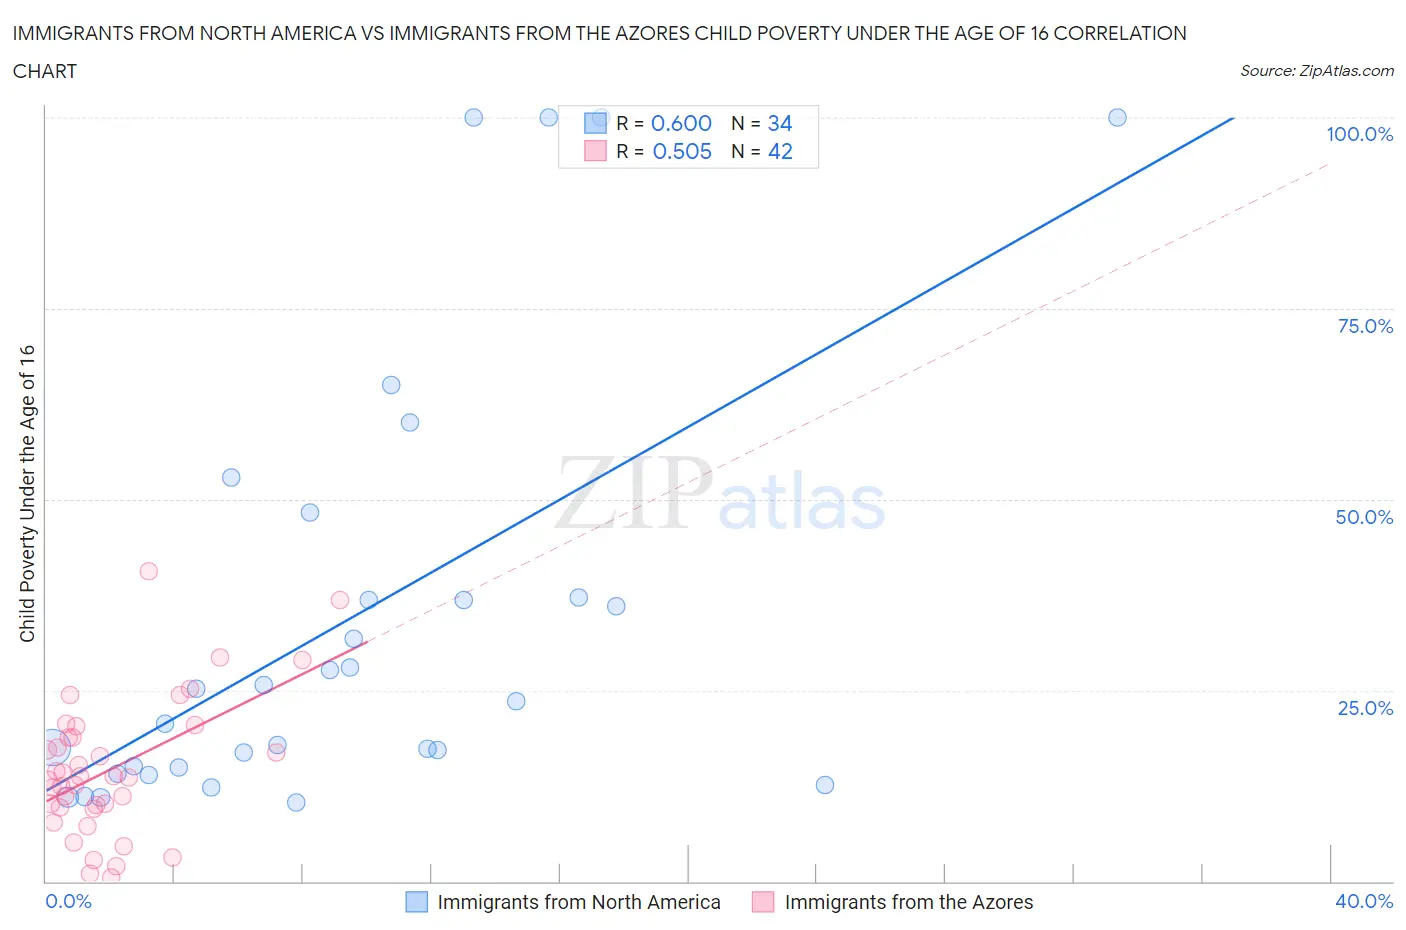 Immigrants from North America vs Immigrants from the Azores Child Poverty Under the Age of 16